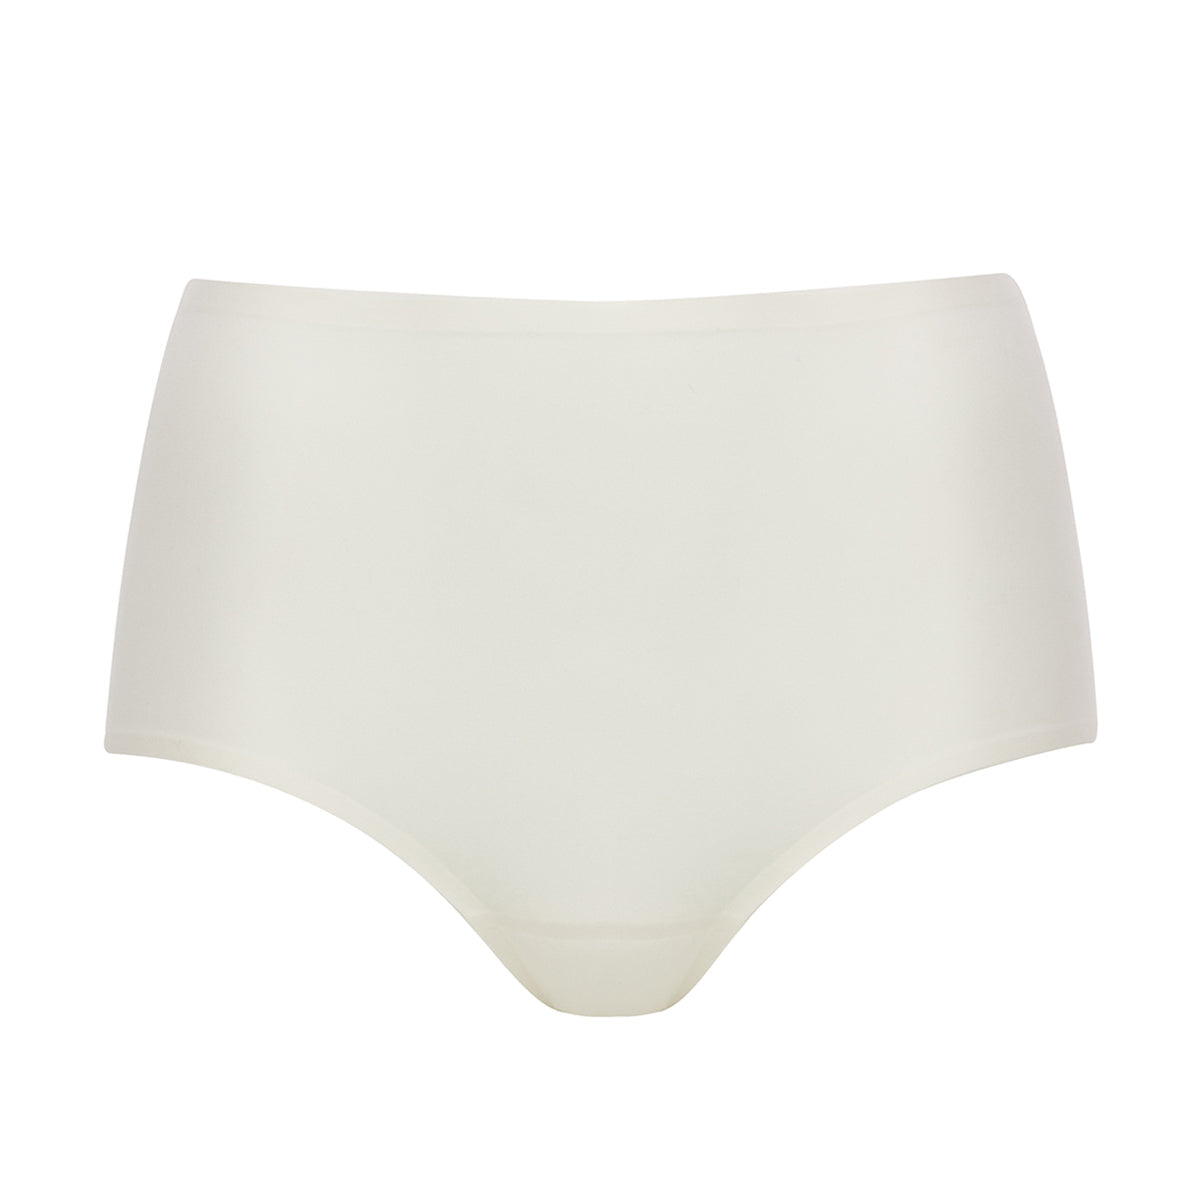 Chantelle Soft Stretch Brief 2647 in ivory natural off-white seamless panty lingerie canada linea intima bride bridal lingerie